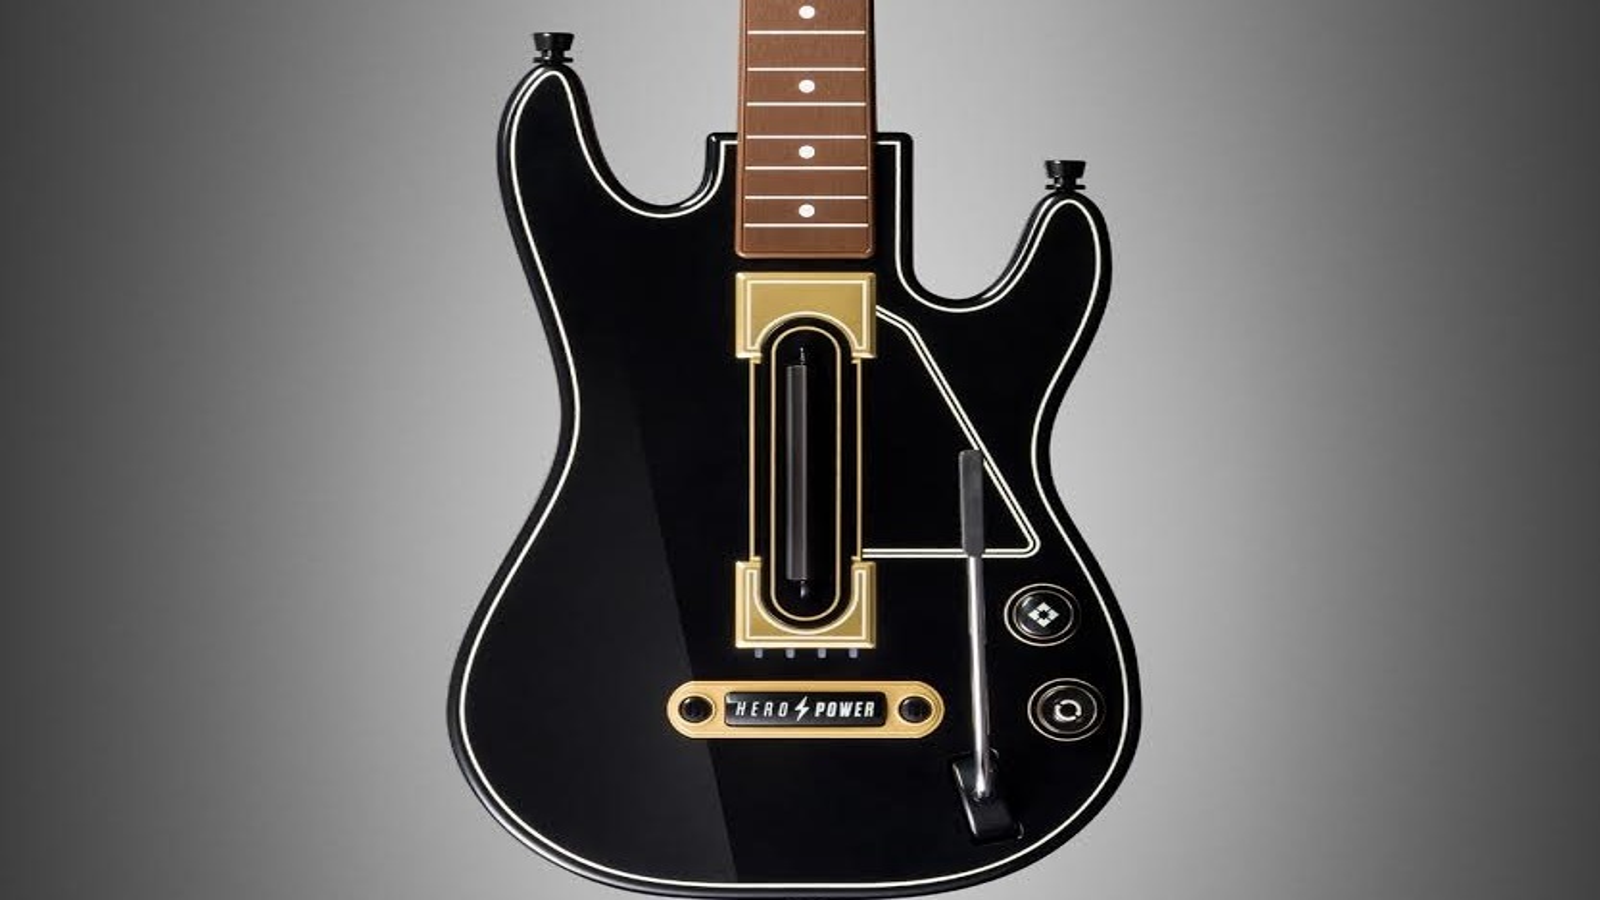 PS4 Guitar Hero Live - GAME ONLY